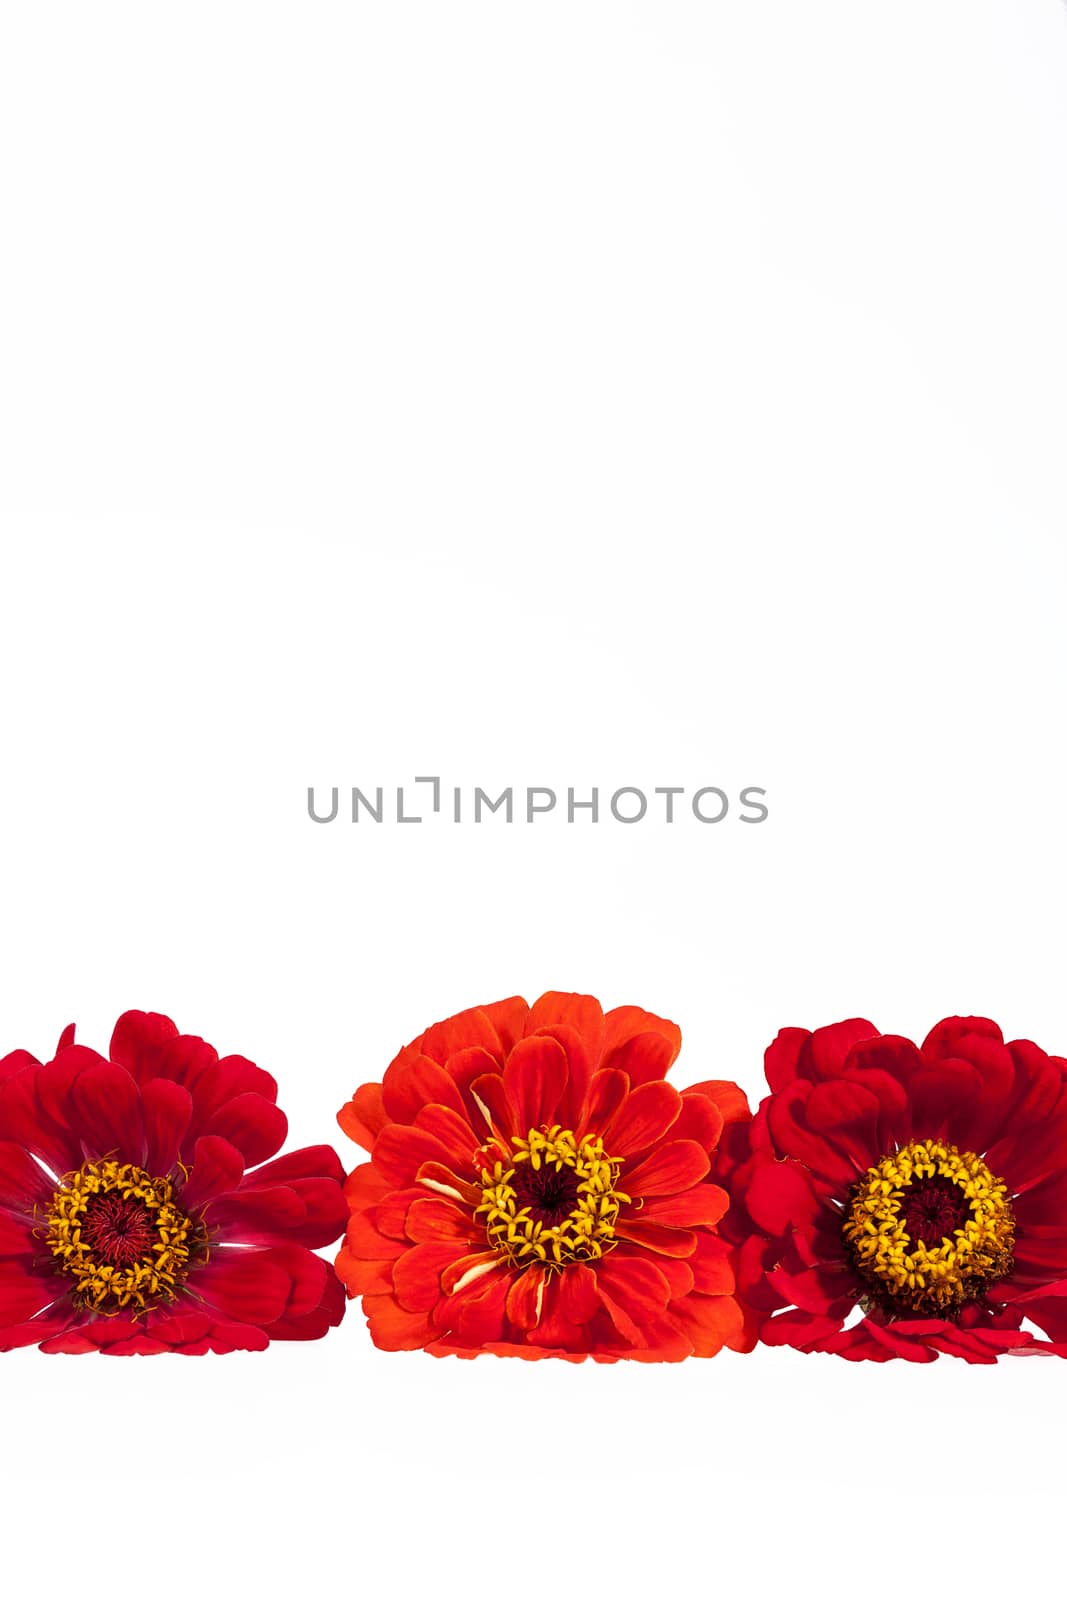 Flowers of red zinnia isolated on white background, place for text by mychadre77